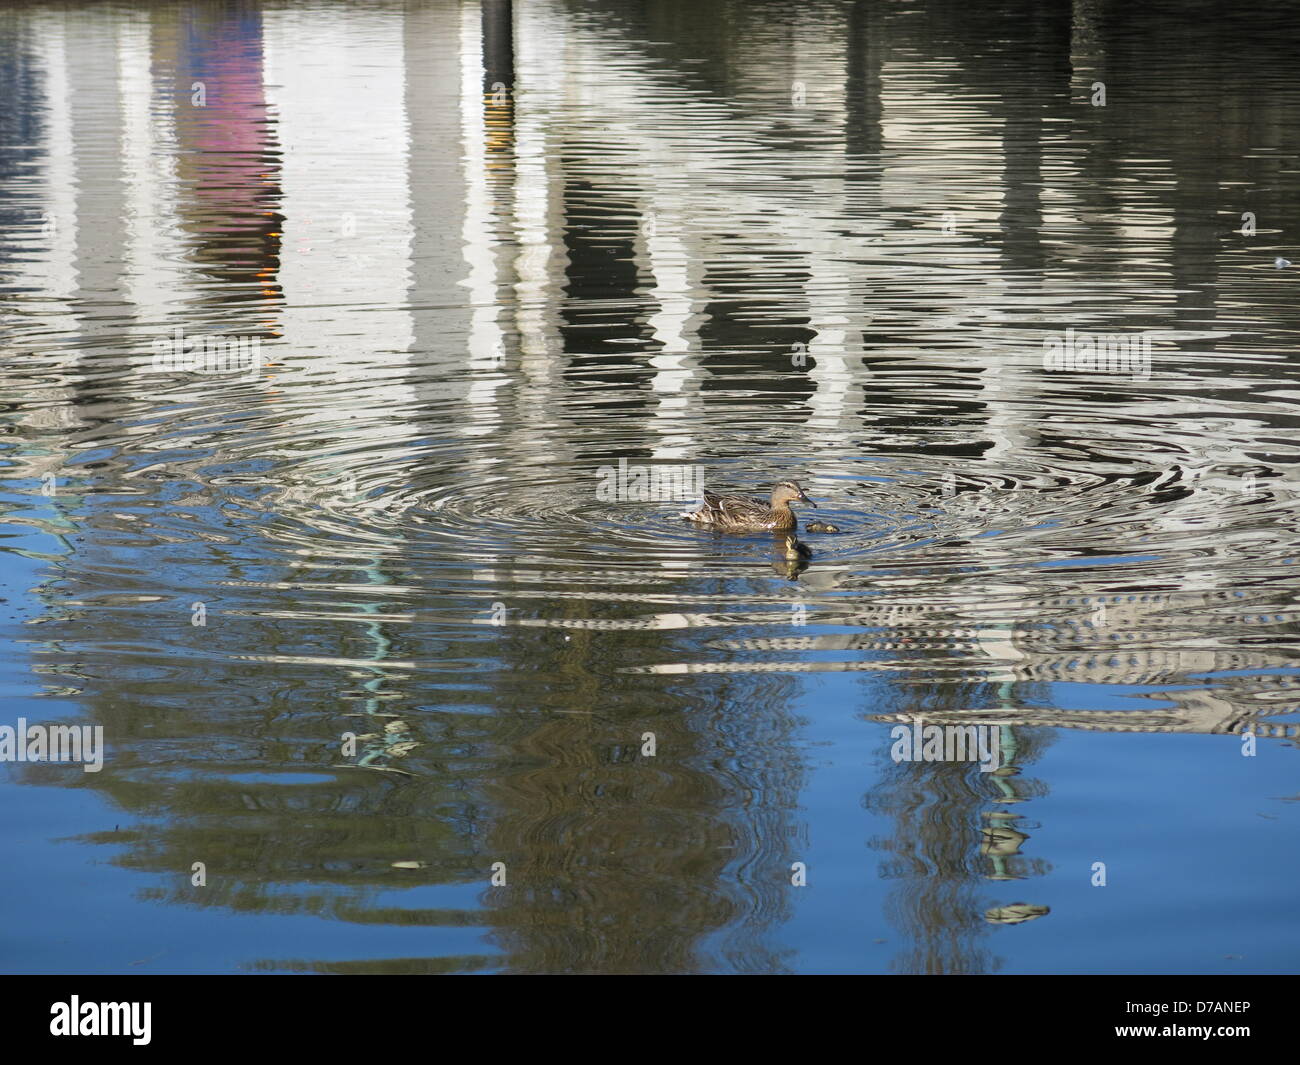 Reading, Berkshire, UK. 2nd May 2013. This young duckling was killed by the duck, who attacked it, and forced it under the water repeatedly.   Taken on the River Thames, in Reading, Berkshire, UK on the 2nd May 2013. Credit:  Sarah Tubb / Alamy Live News Stock Photo